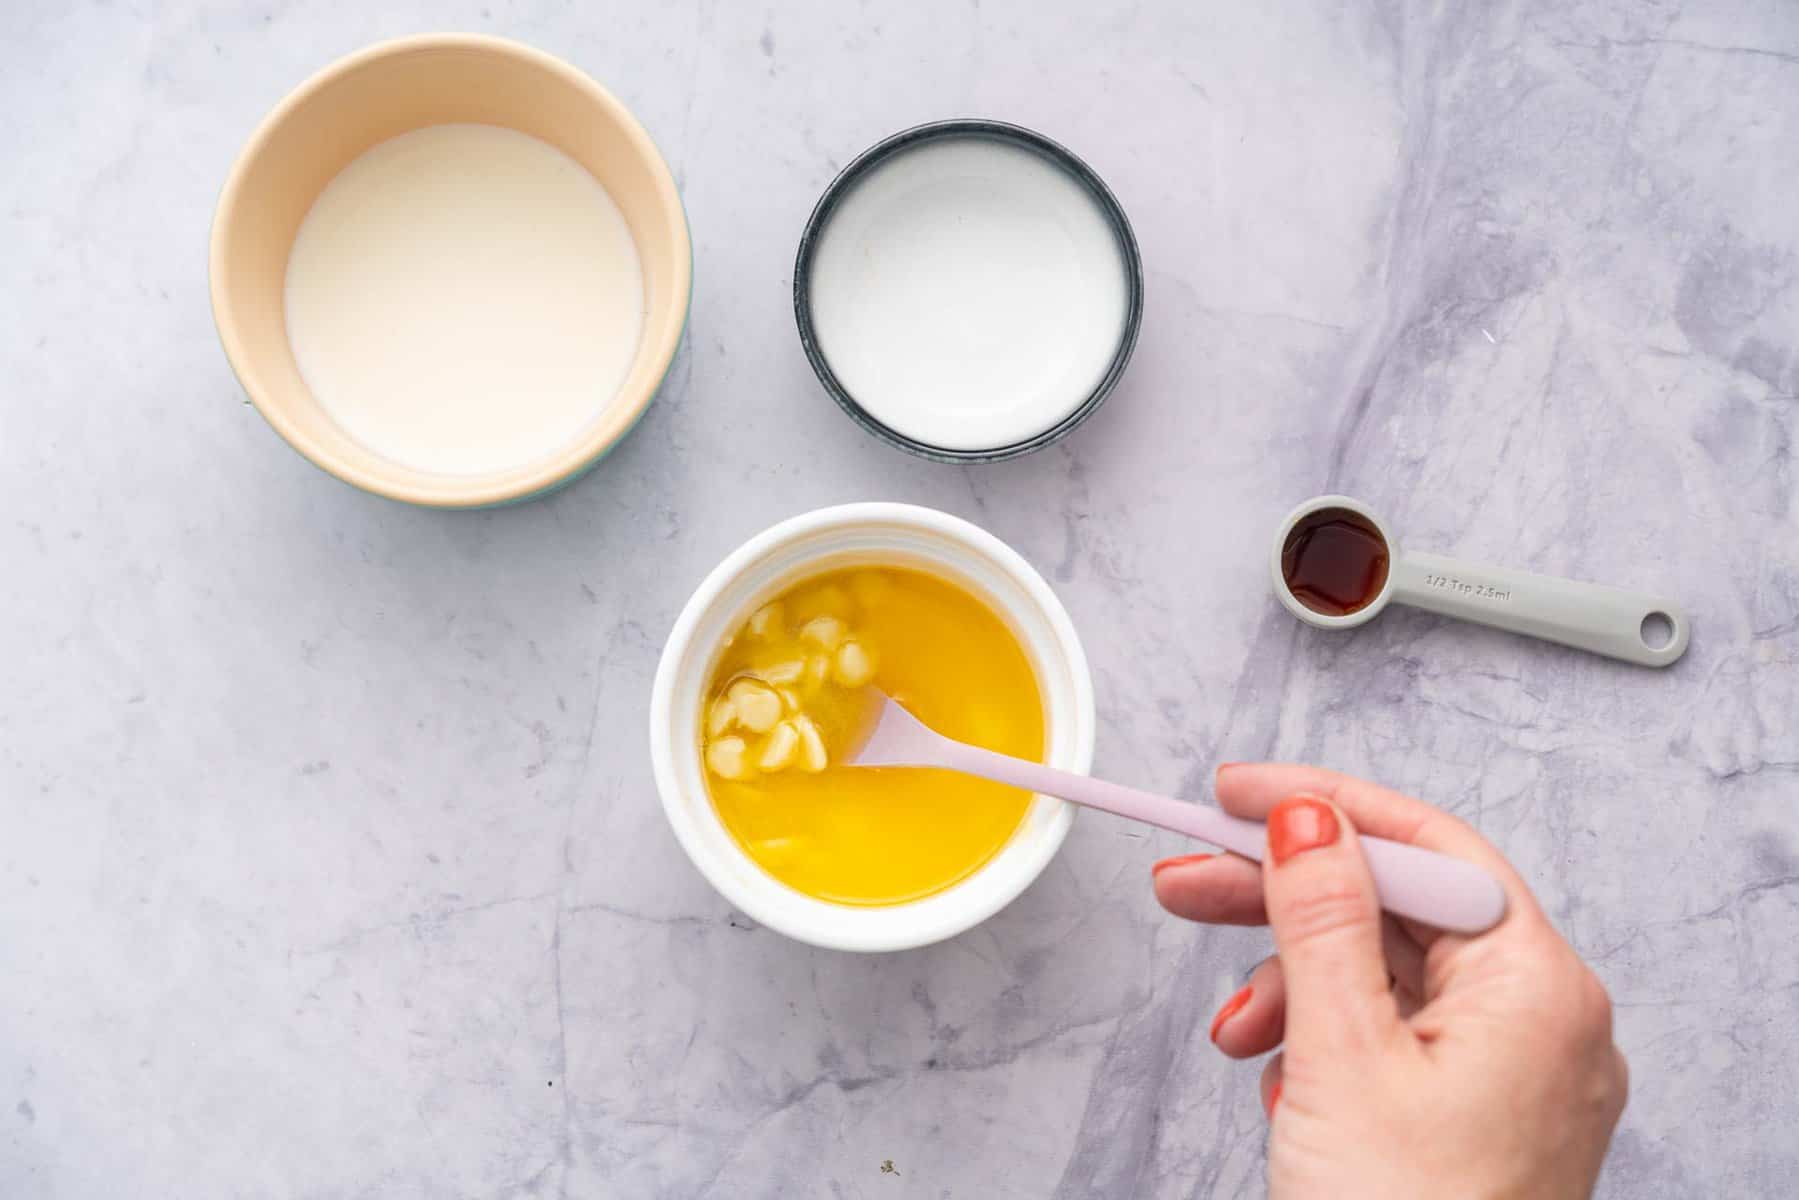 Ramekin showing the white chocolate and melted butter in a mug being mixed with a spoon next to ½ teaspoon of vanilla essence and emptied ramekins beside 